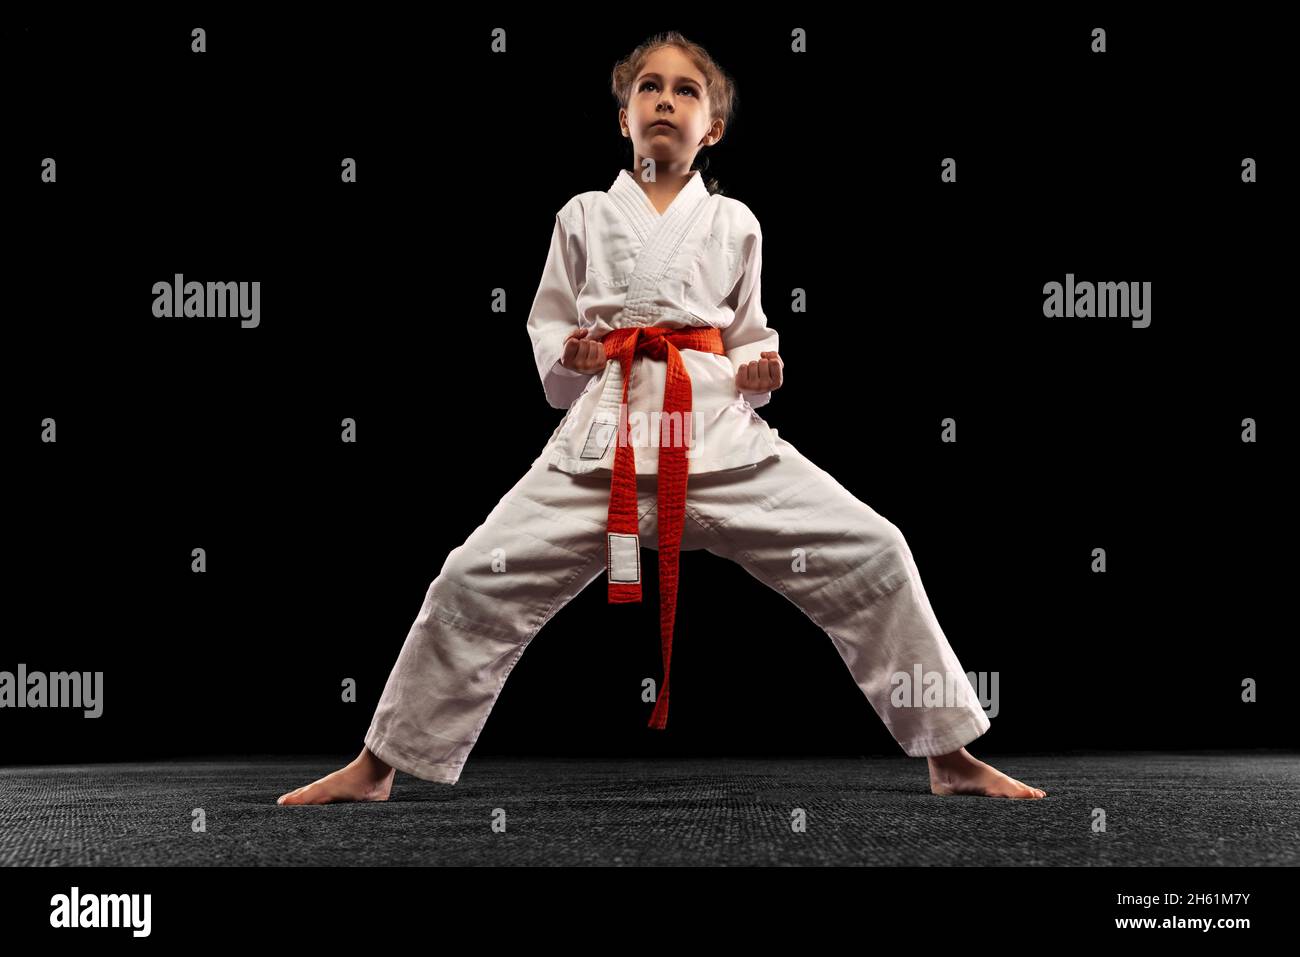 One little girl, young karate in fighting stance isolated over dark background. Concept of sport, education, skills Stock Photo